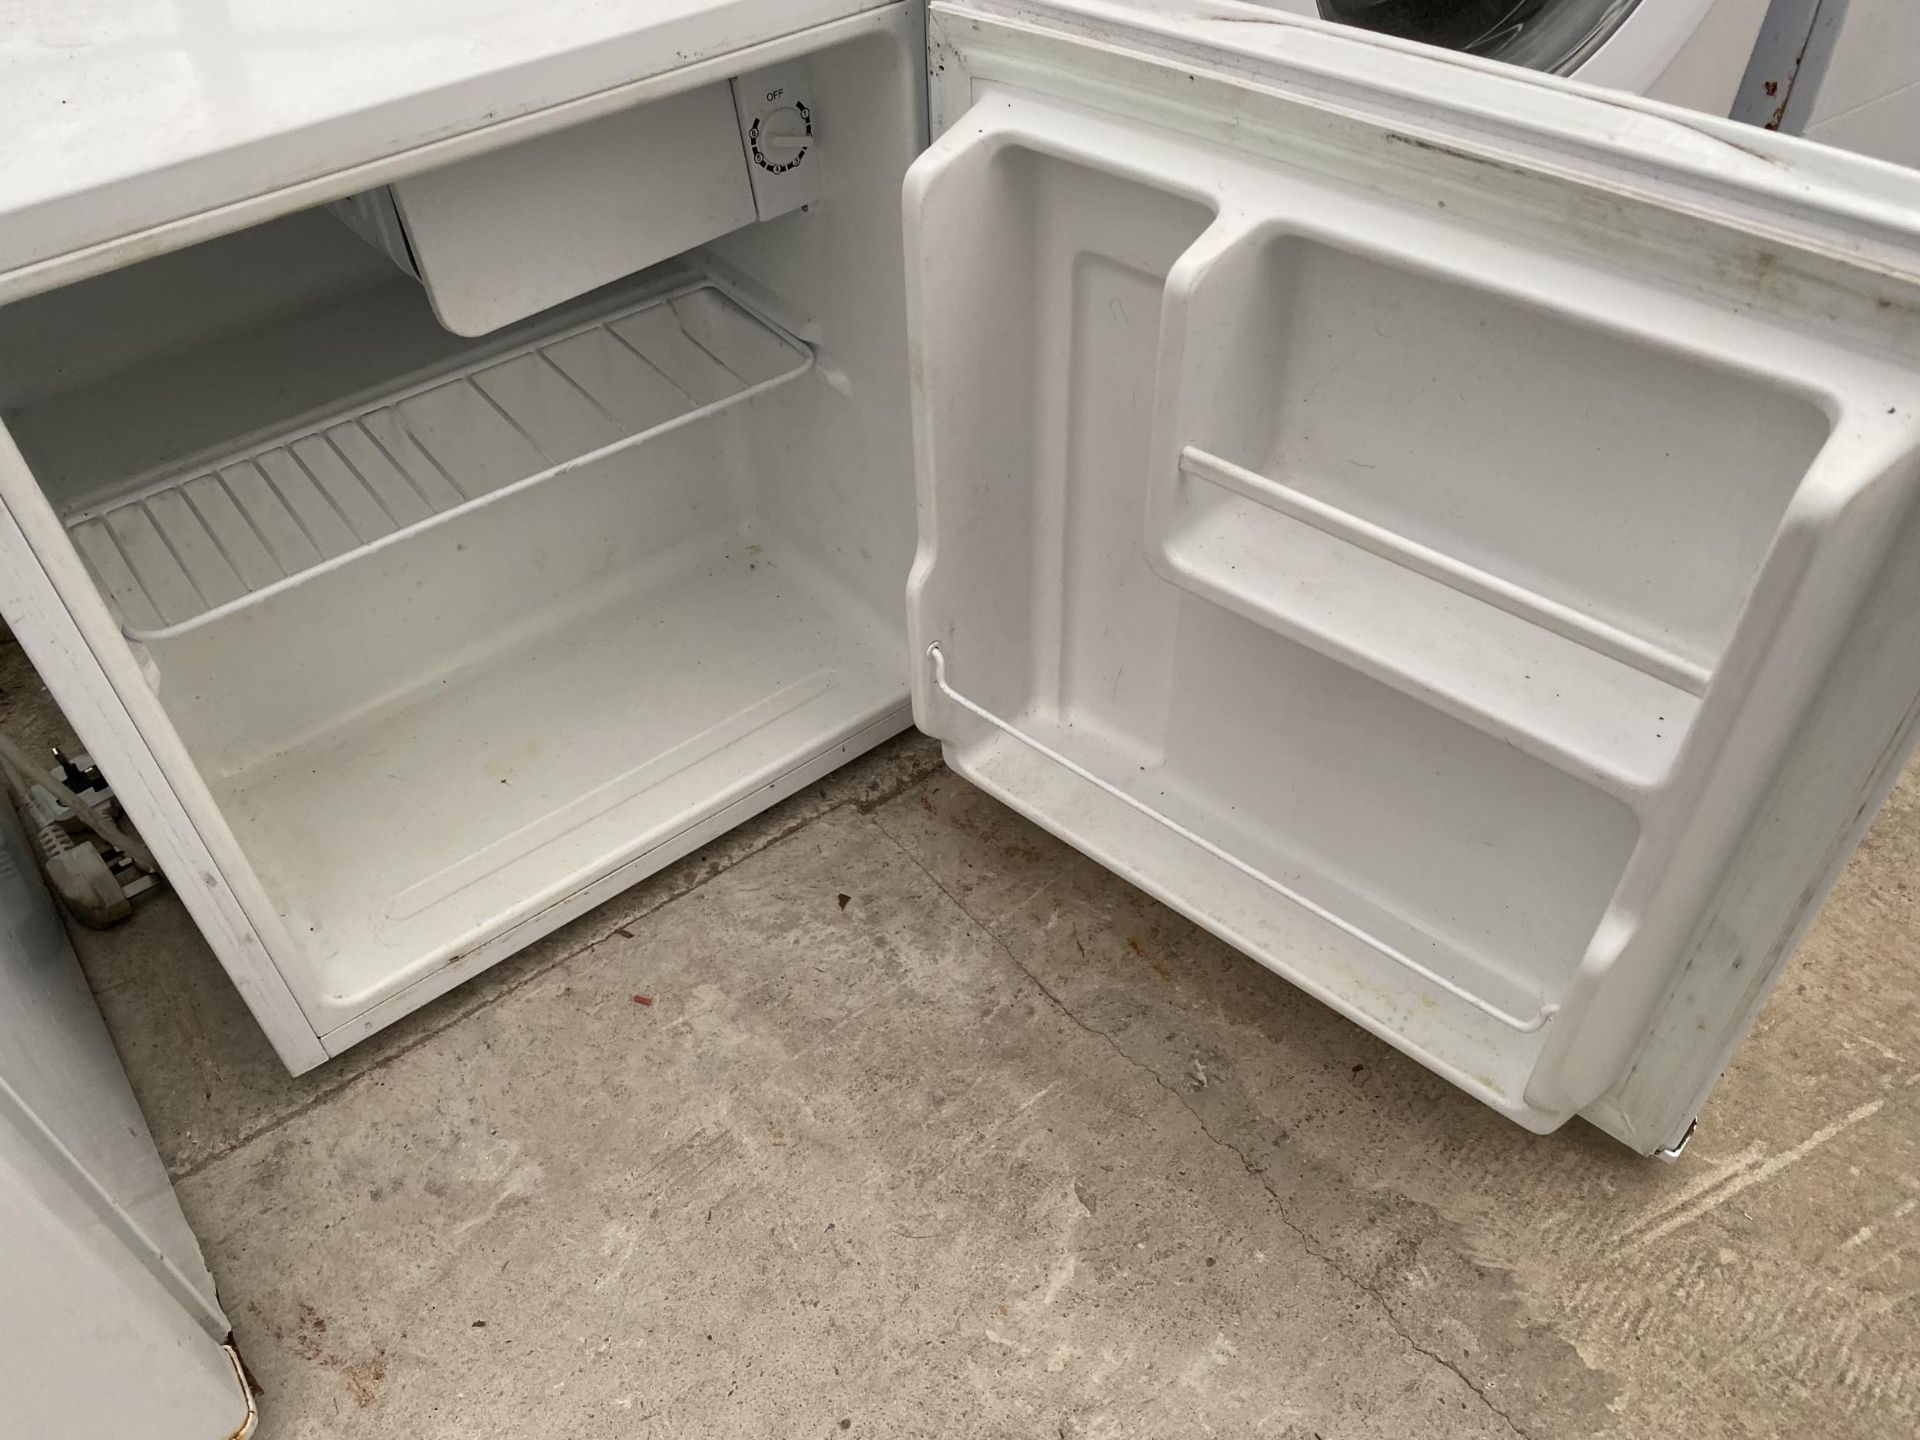 A WHITE RUSSELL HOBBS COUNTER TOP FRIDGE - Image 2 of 2